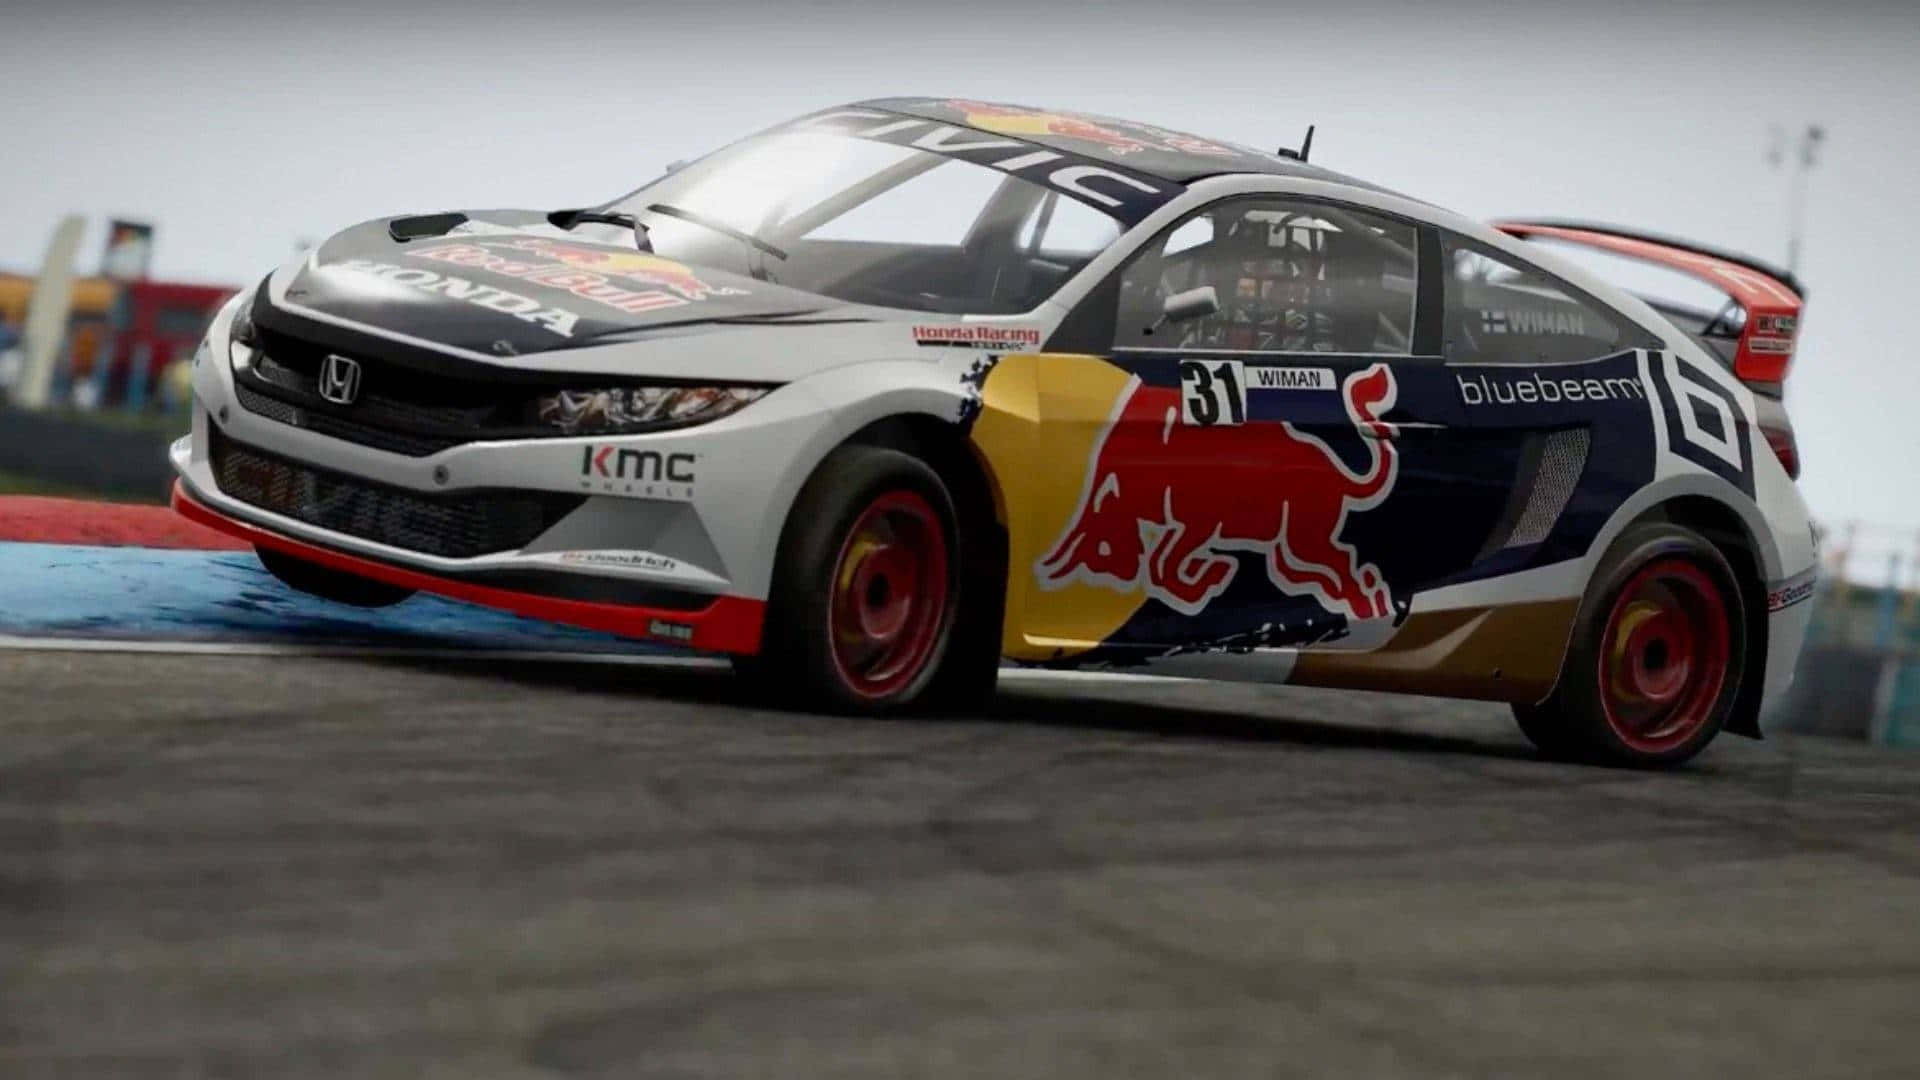 Step Up the Challenge and Race Through the HD Project Cars 2 Background